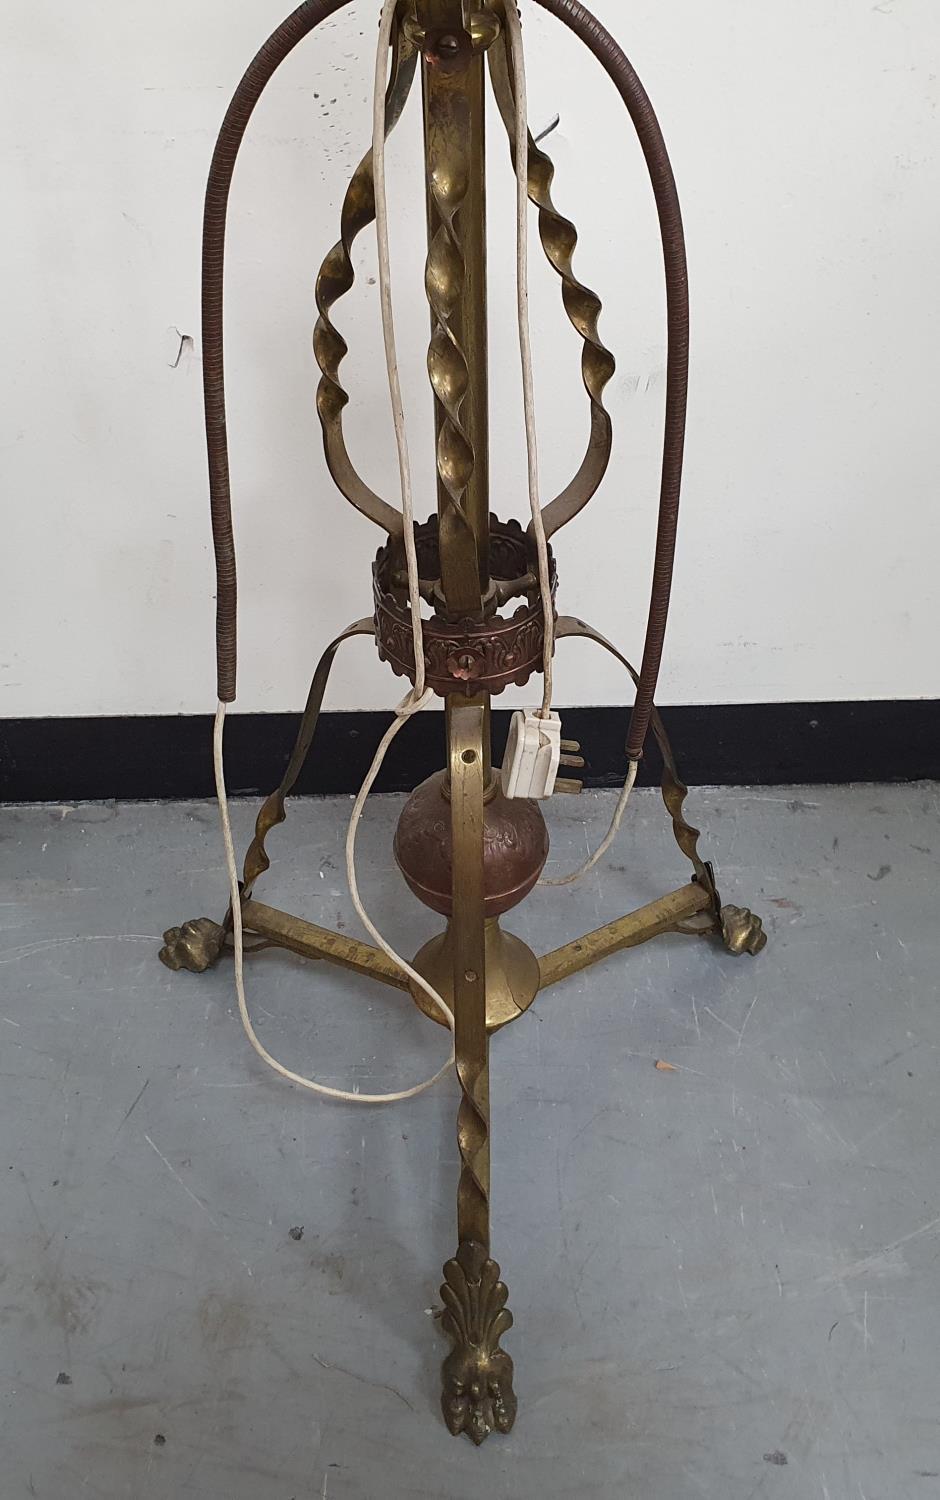 Brass floor lamp converted from an antique oil lamp, 160 cm tall - Image 2 of 3